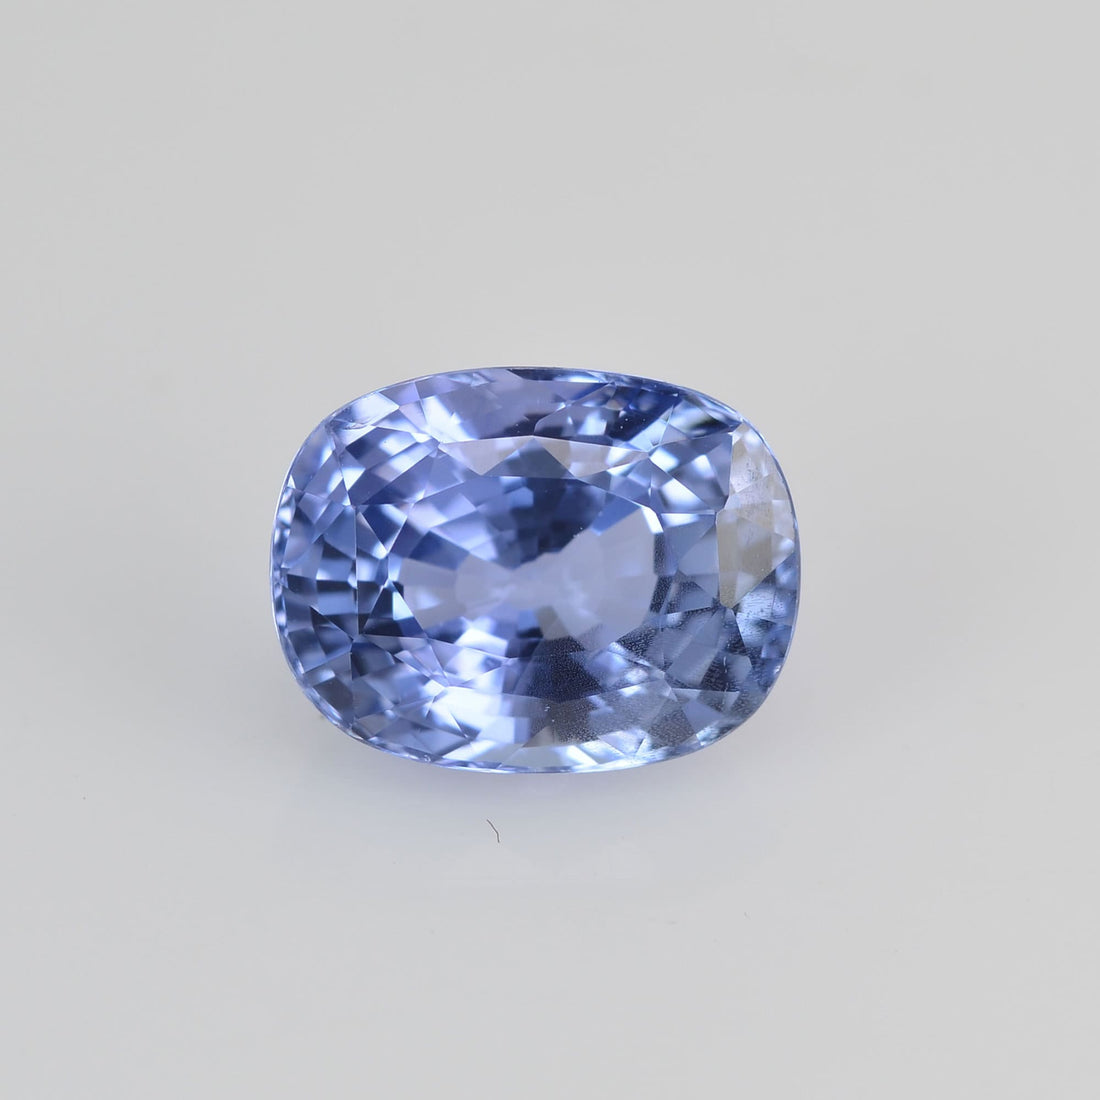 3.42 cts Unheated Natural Blue Sapphire Loose Gemstone cushion Cut Certified